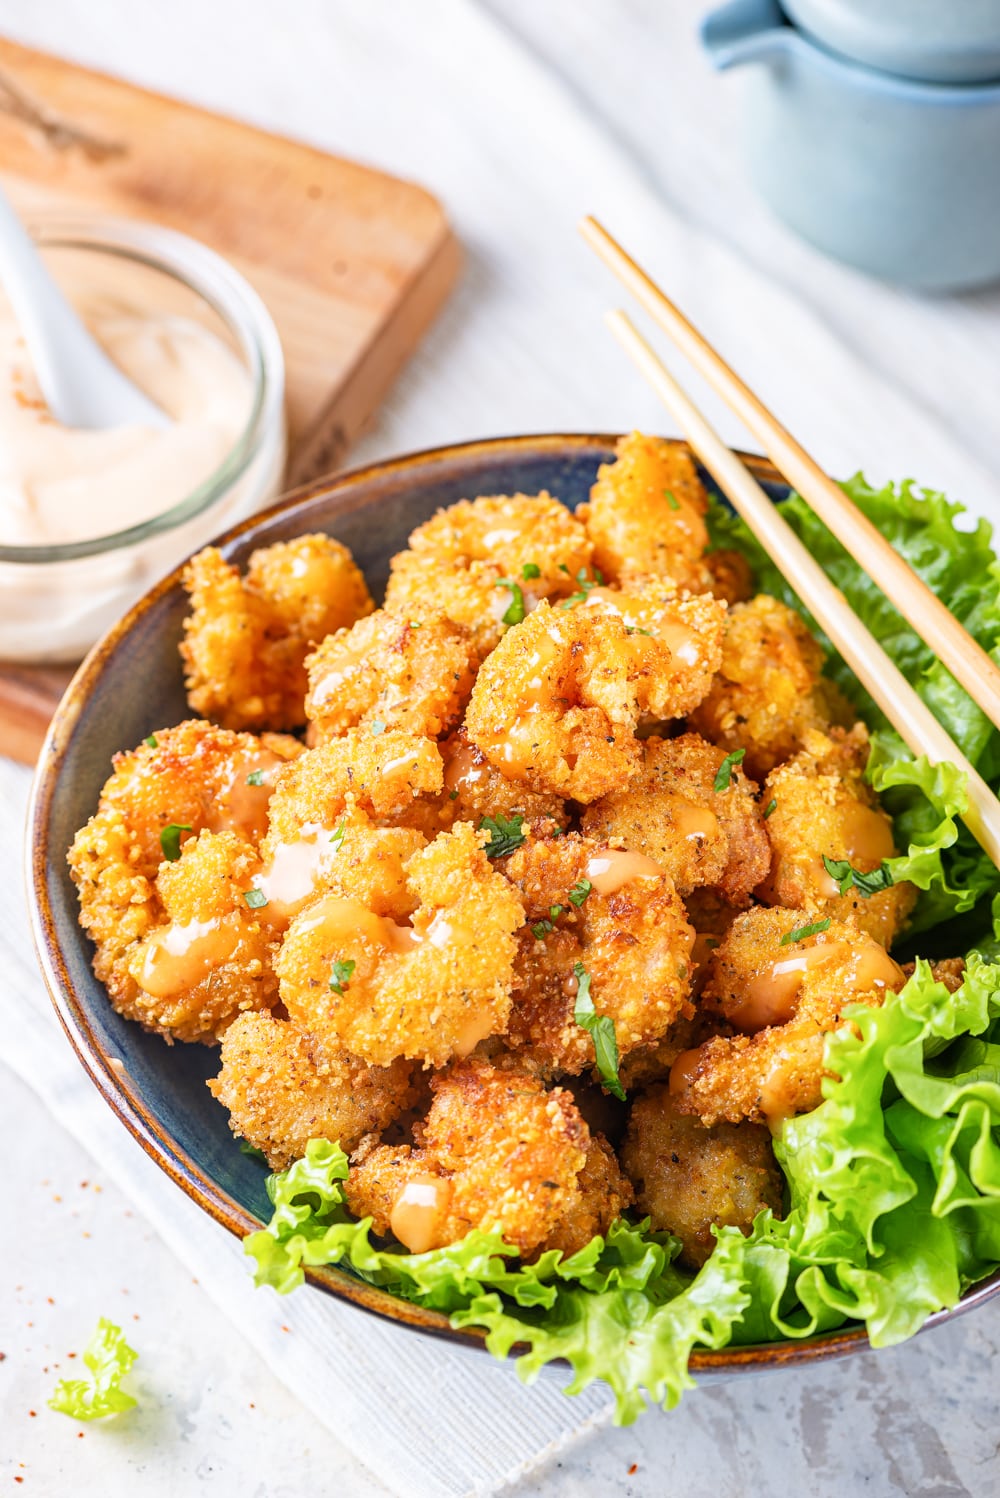 A blue bowl filled with bang bang shrimp. There is a lettuce garnish around the outer right rim of the bowl with chopsticks laid on top. A small glass jar of bang bang sauce is on a wooden cutting board to the left behind the bowl of shrimp.